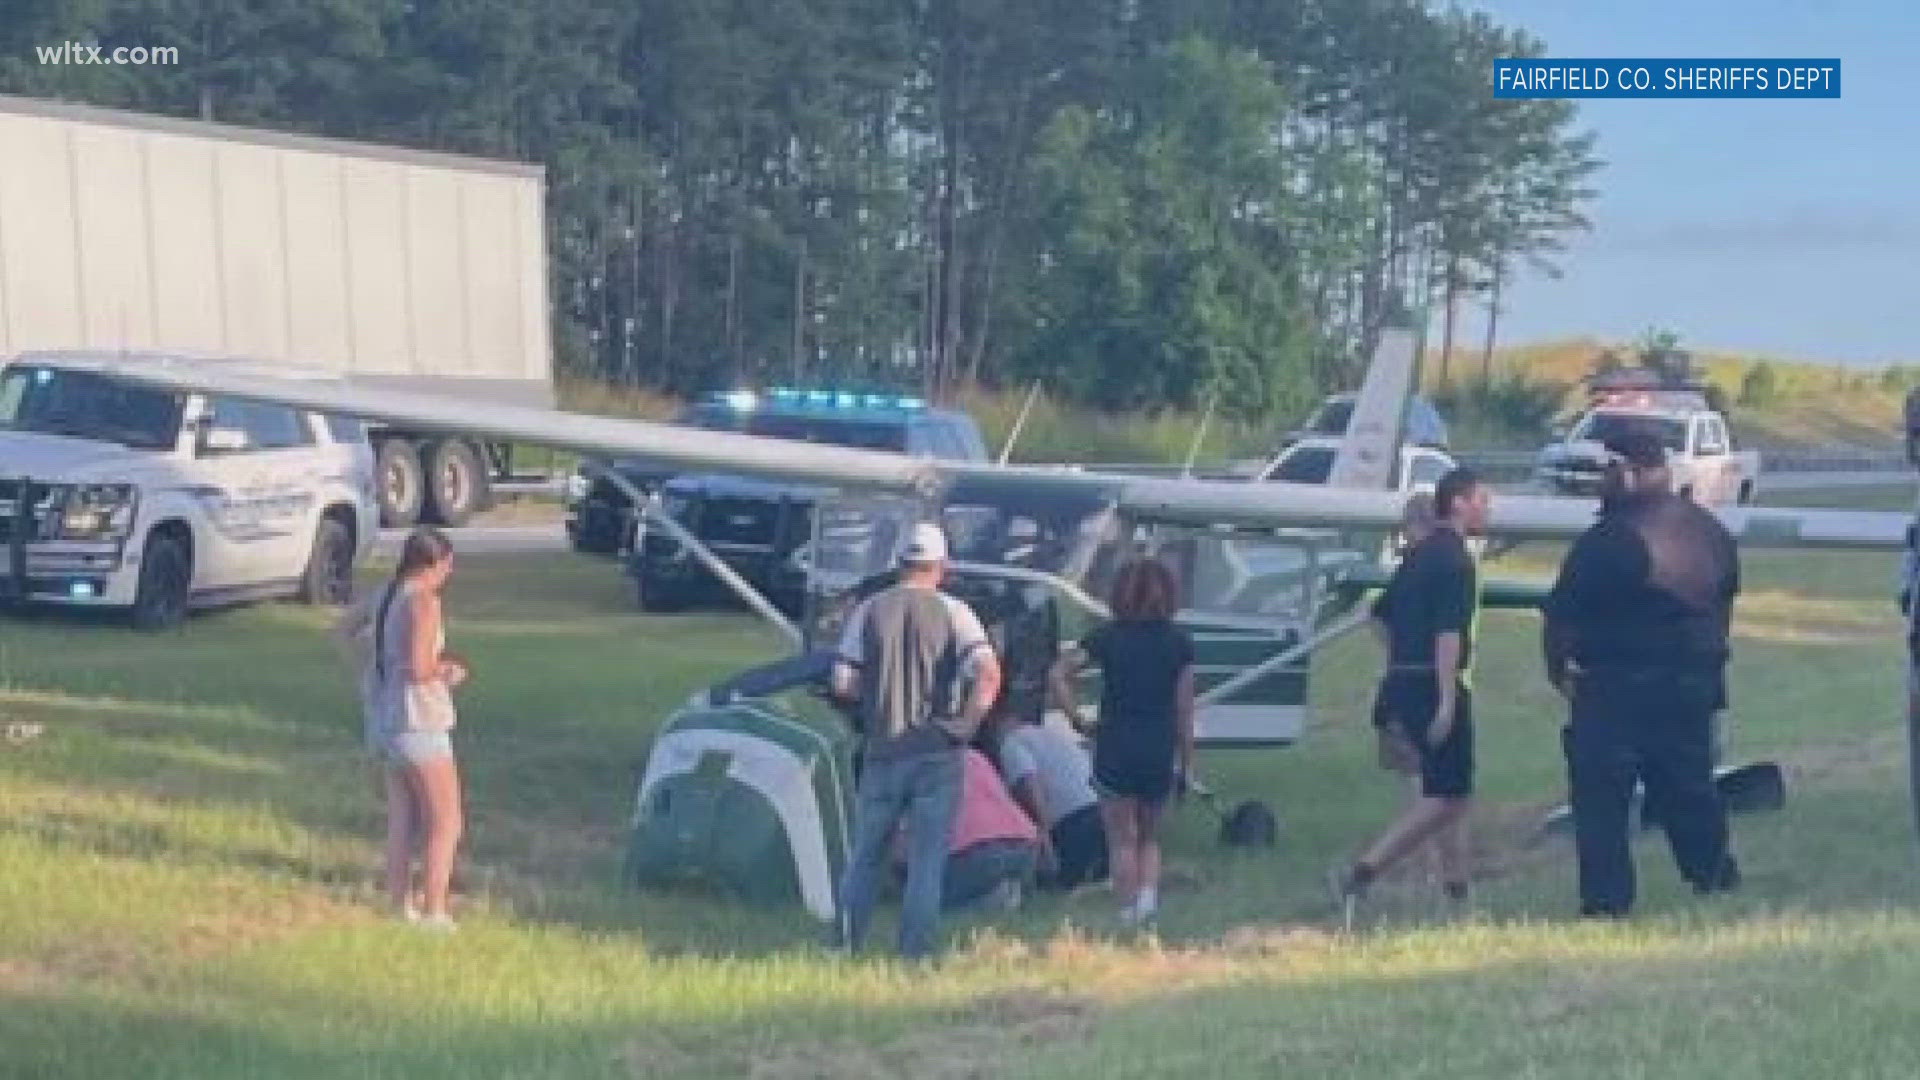 A plane from a local flight school in Fairfield County had to make an emergency landing on I-77 Thursday evening.